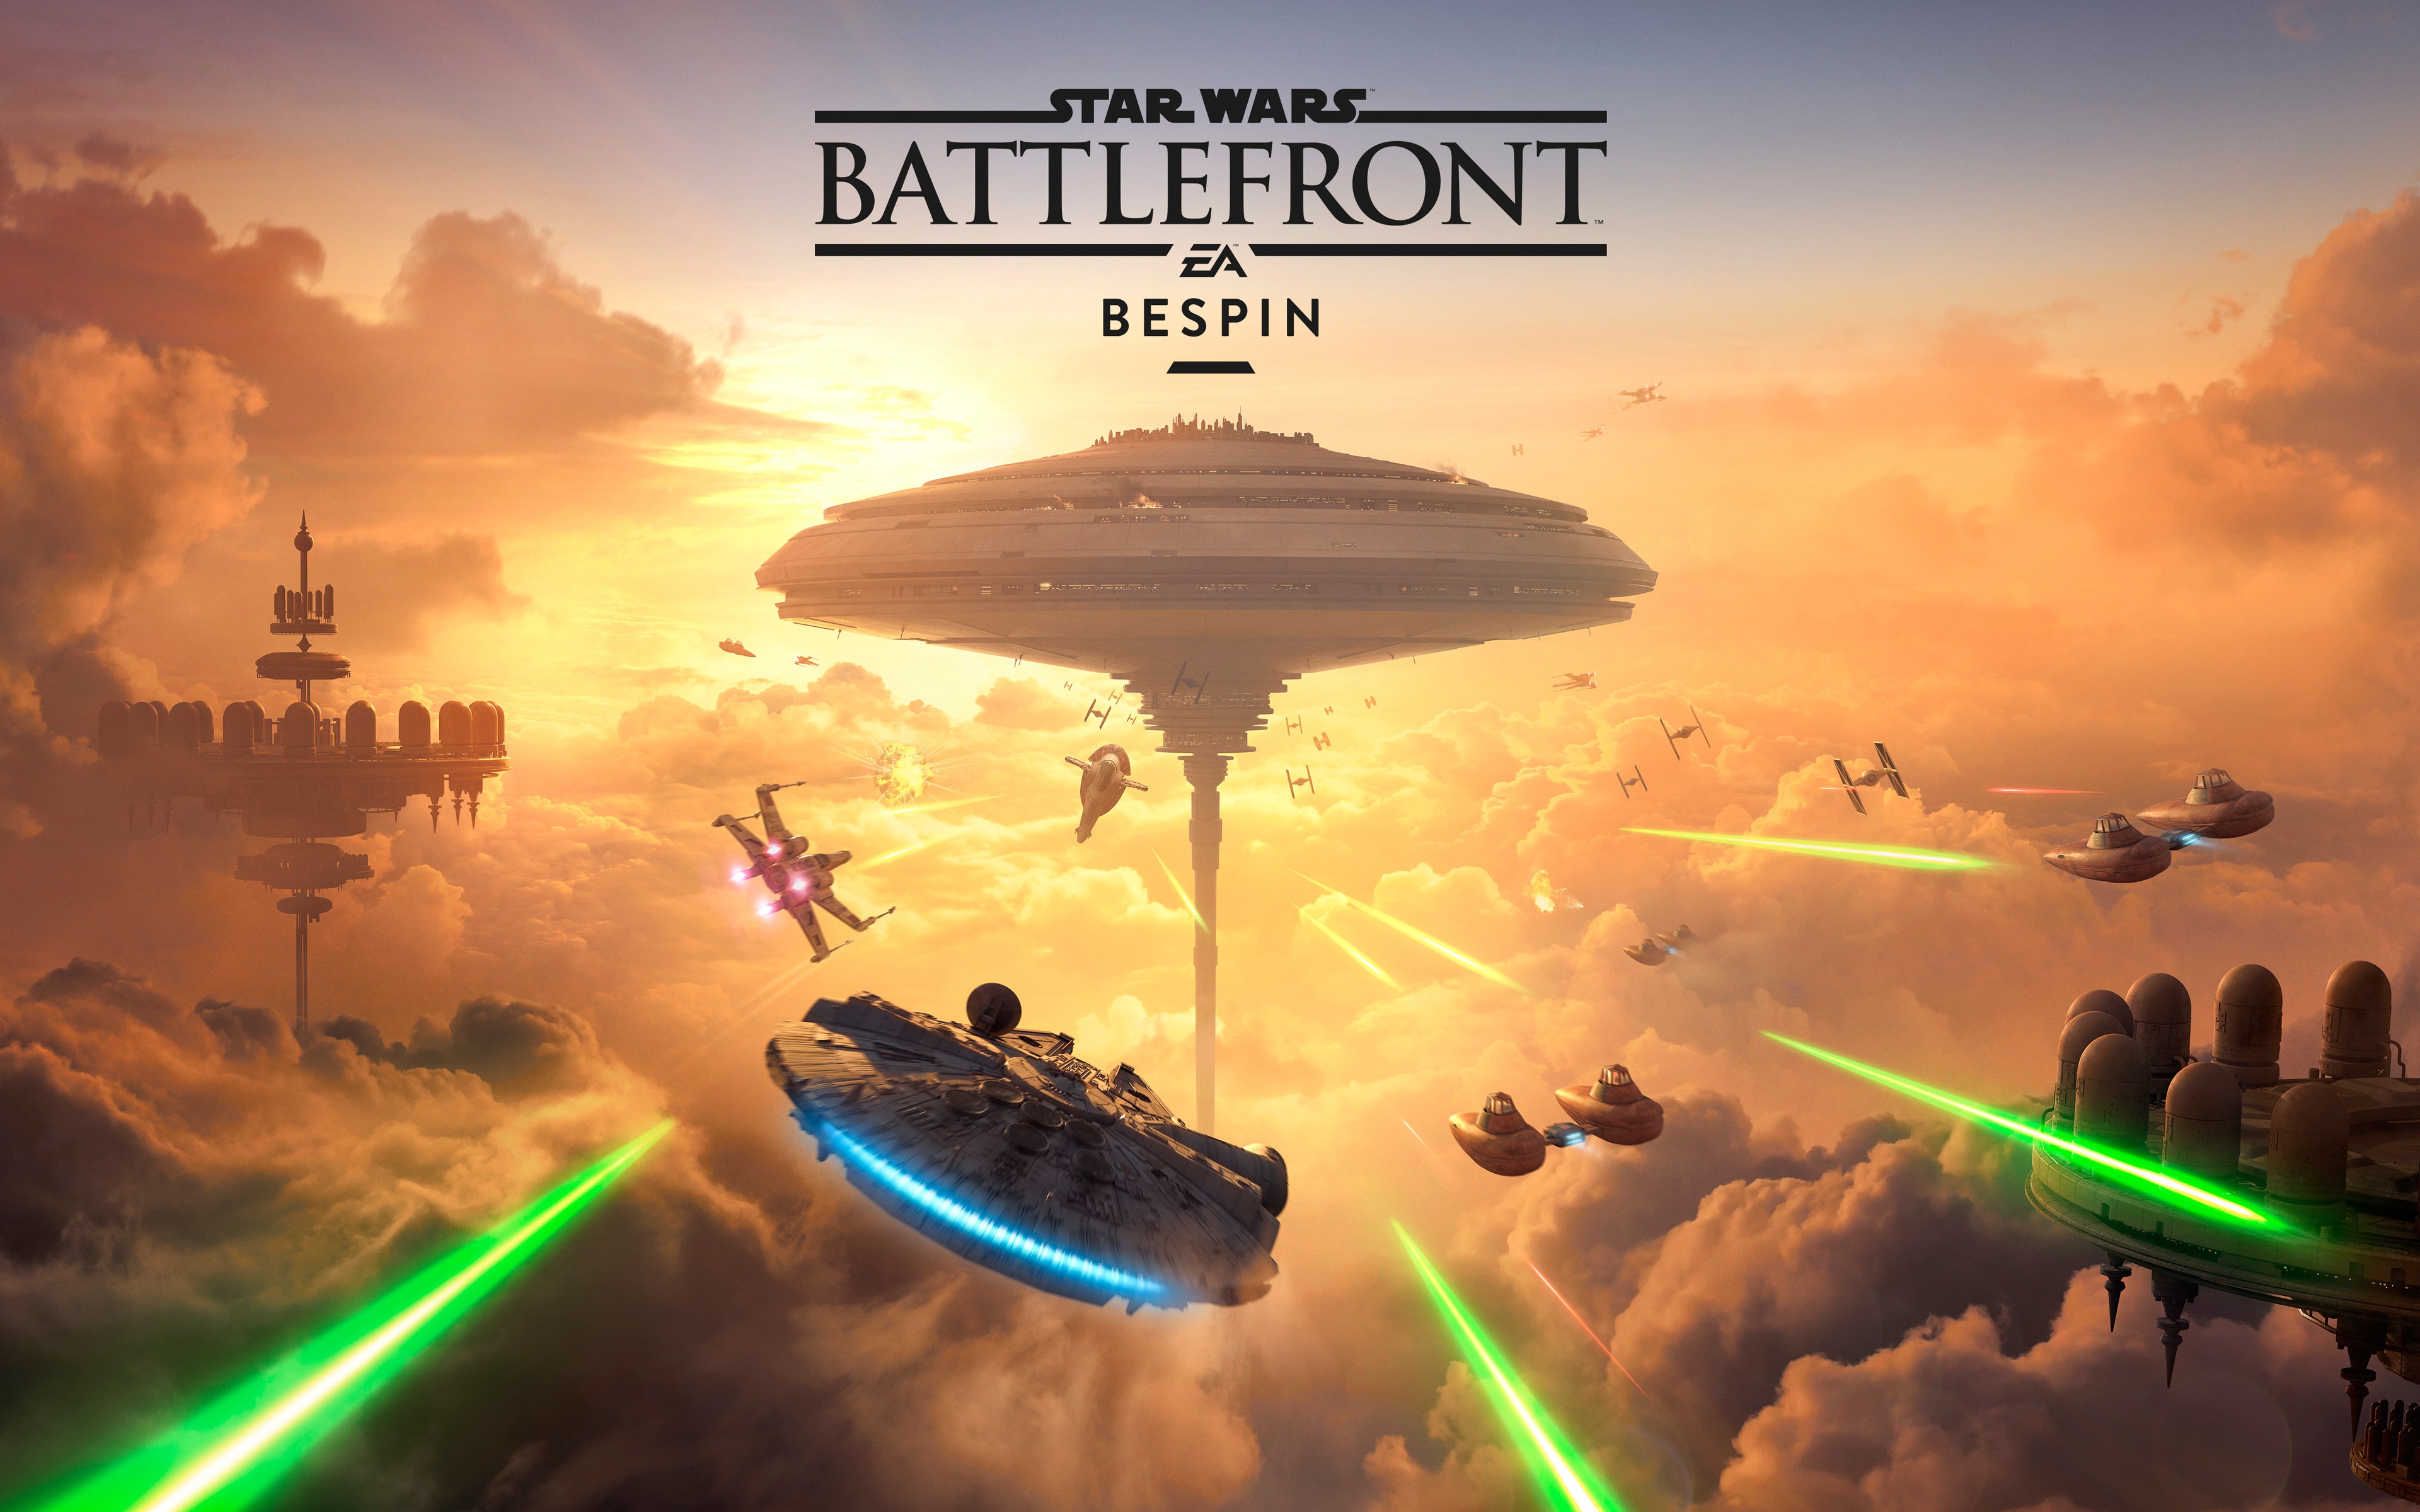 General 3840x2400 Star Wars: Battlefront EA Games Star Wars video games Millennium Falcon Bespin cloud city X-wing science fiction Star Wars Ships Electronic Arts EA DICE PC gaming